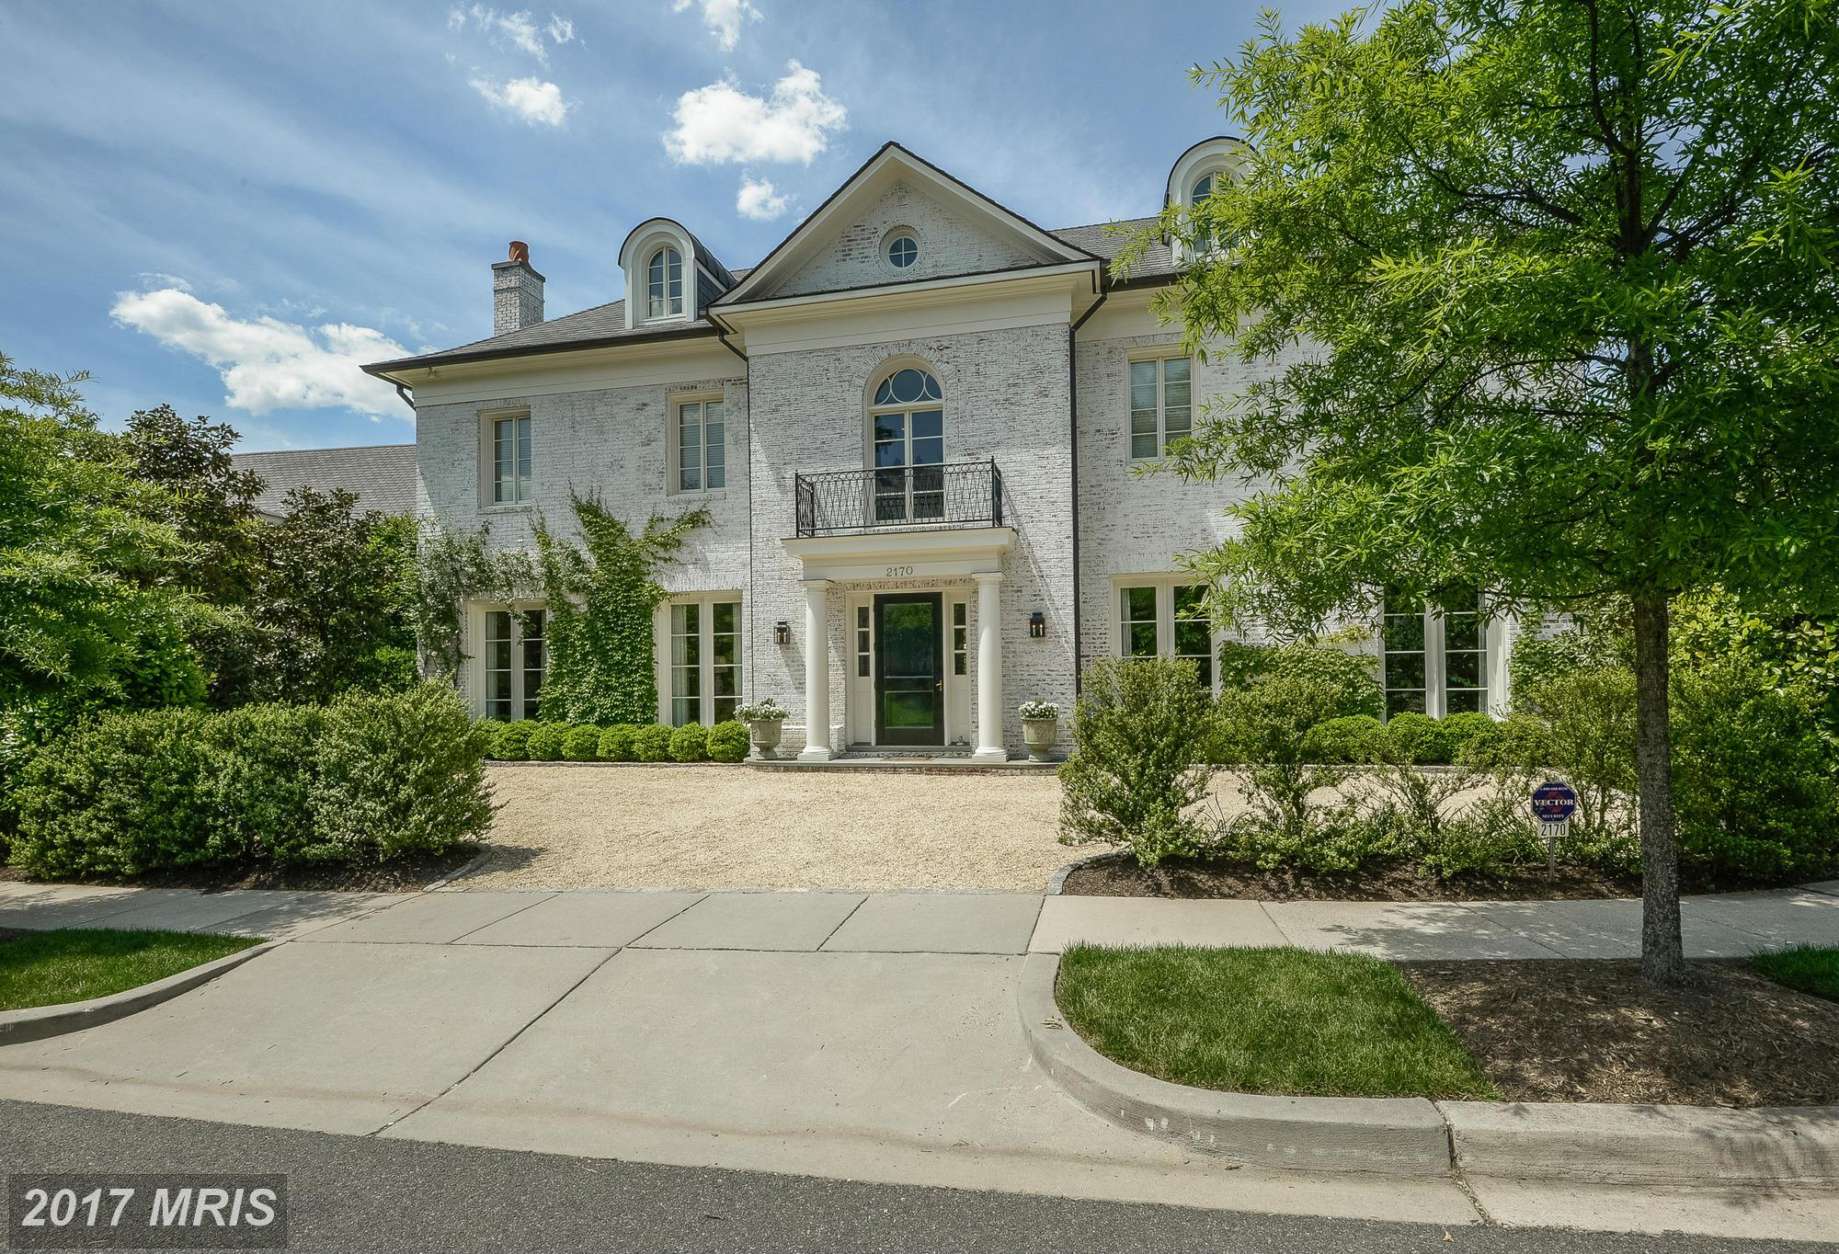 5. $4,200,000

2170 Dunmore Lane NW, Washington, D.C.

This 2009 house in the Berkley neighborhood has seven bedrooms, seven full bathrooms and two half-baths. (Courtesy MRIS, a Bright MLS)